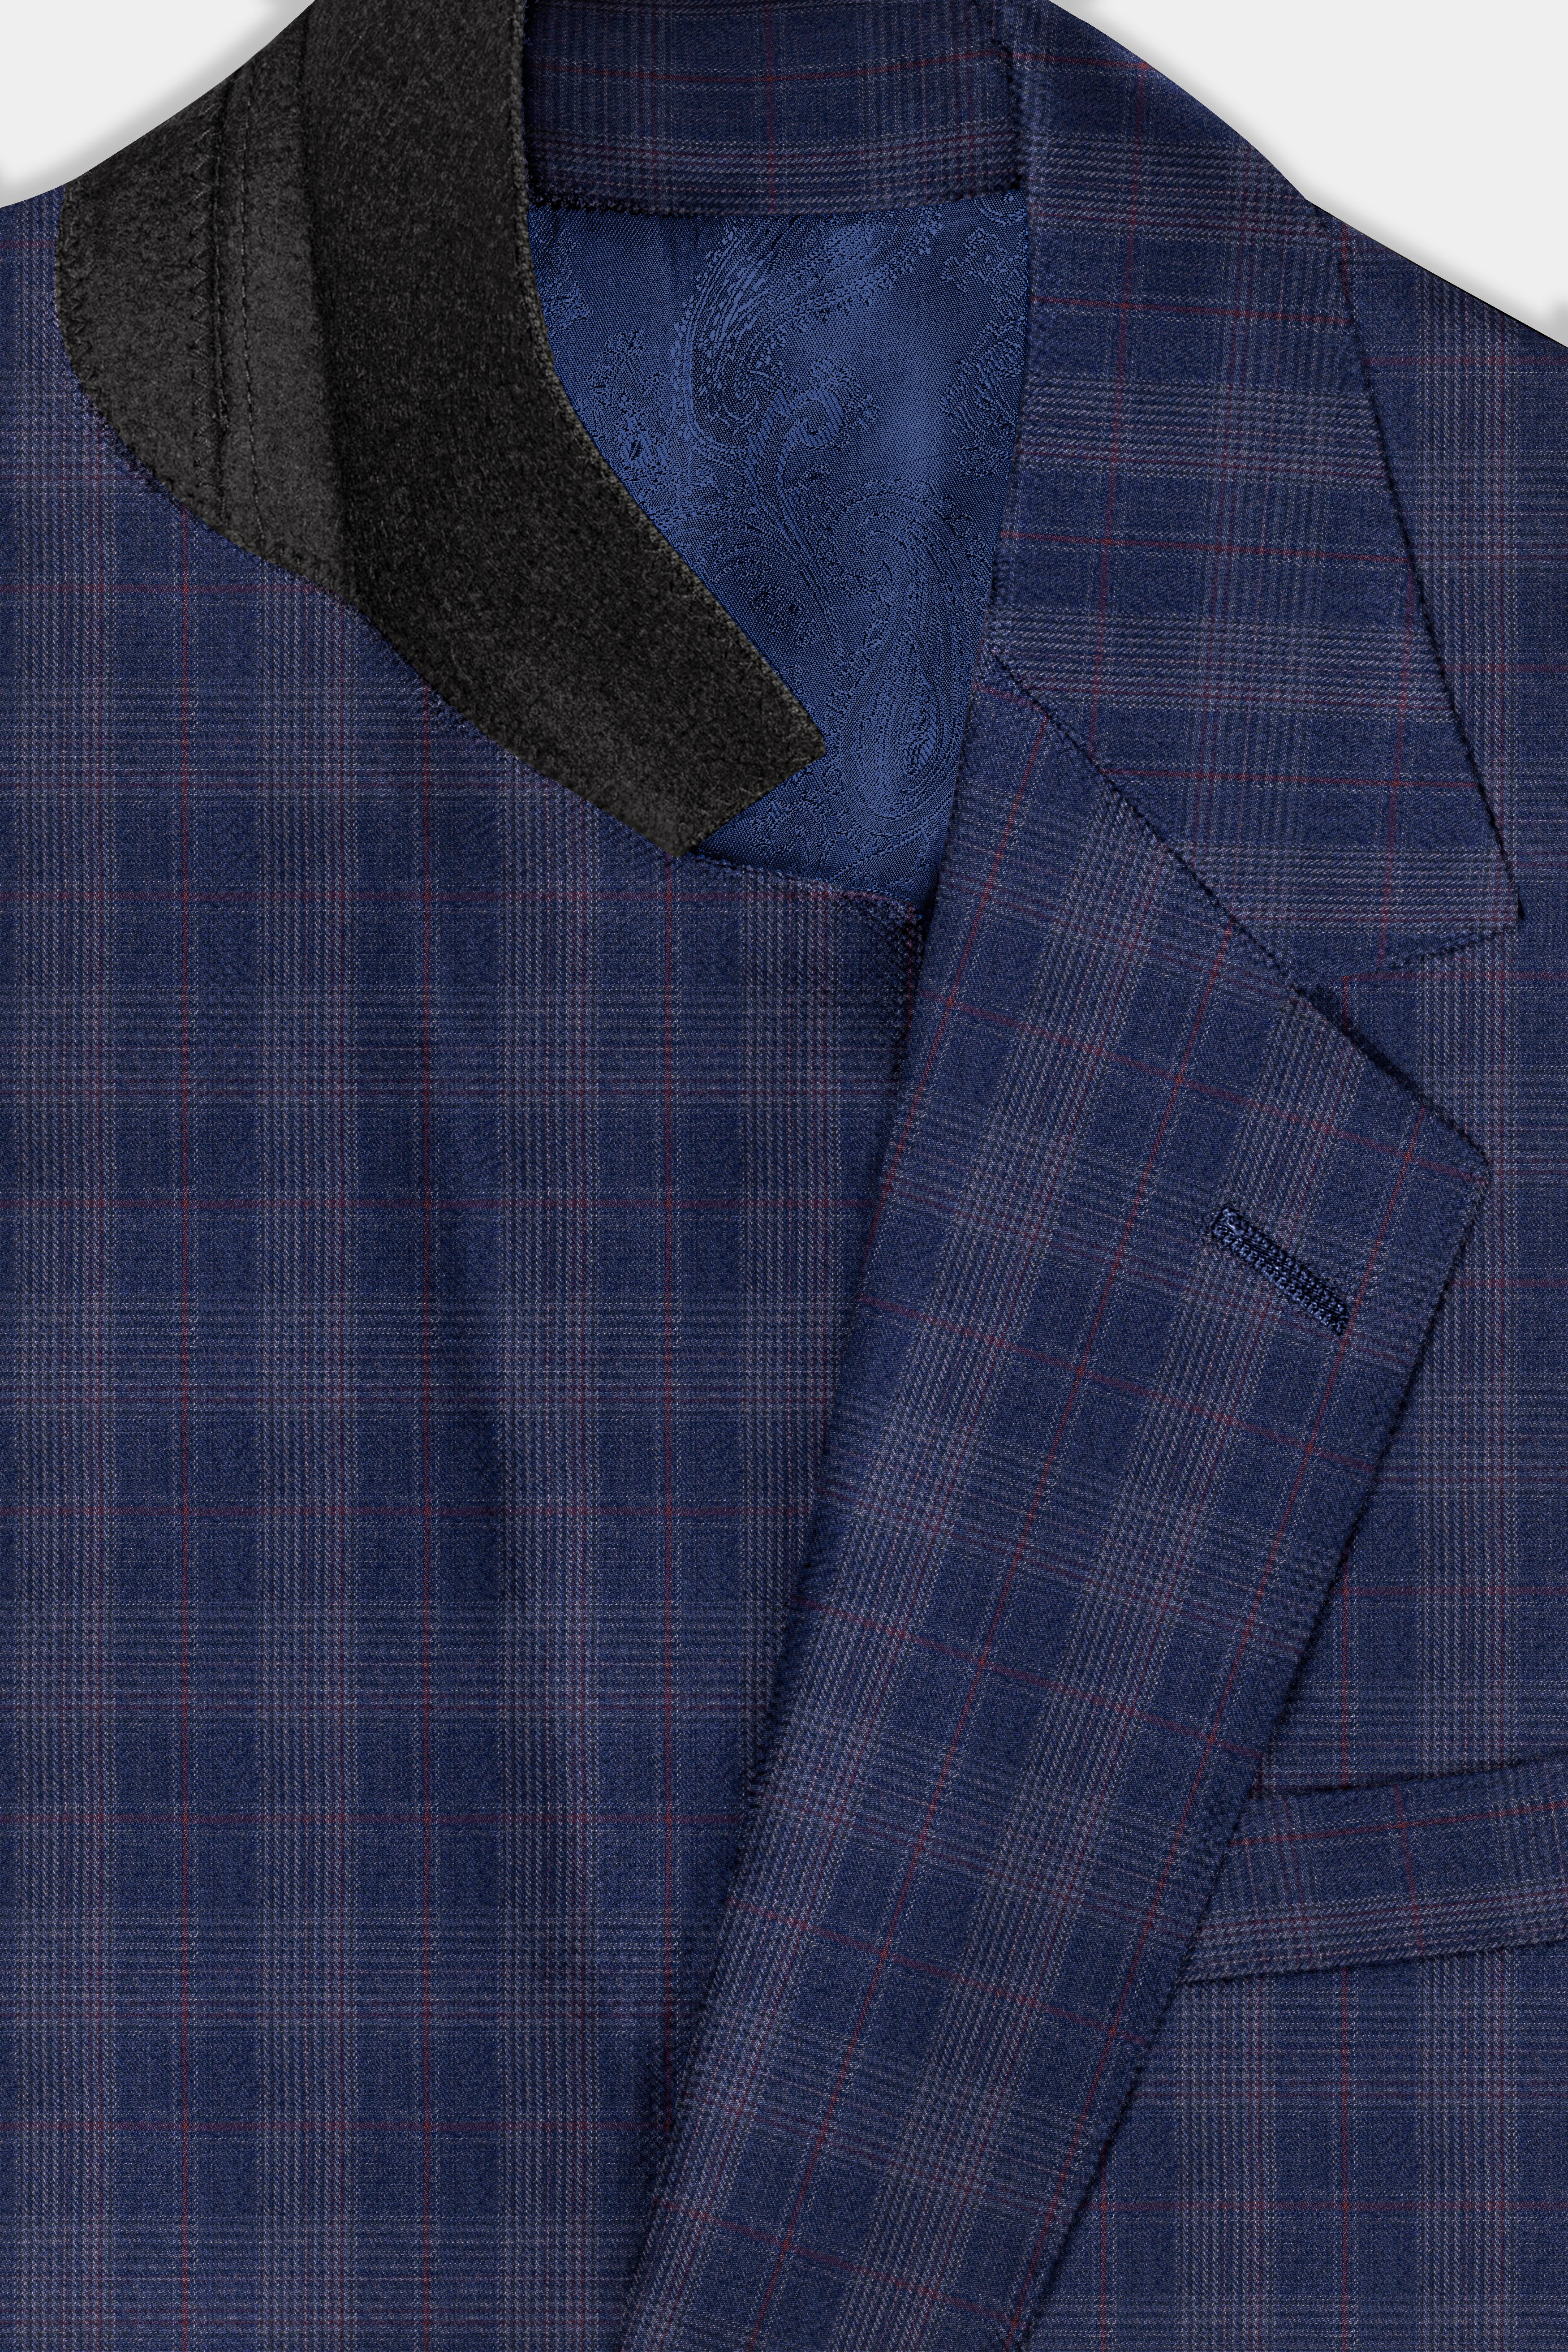 Tuna Blue Checkered Wool Blend Suit